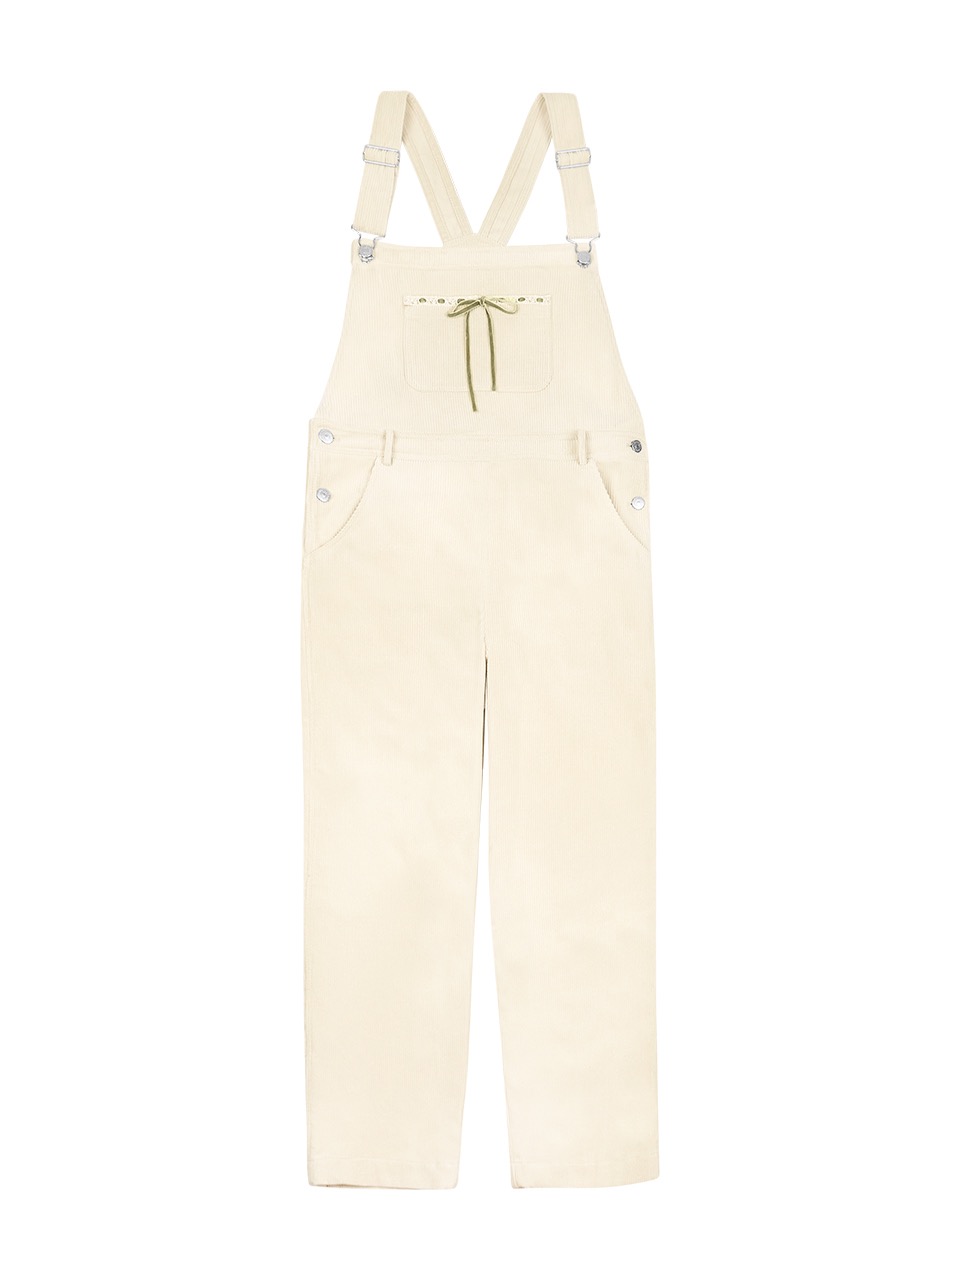 RIBBON CORDUROY OVERALL (IVORY)